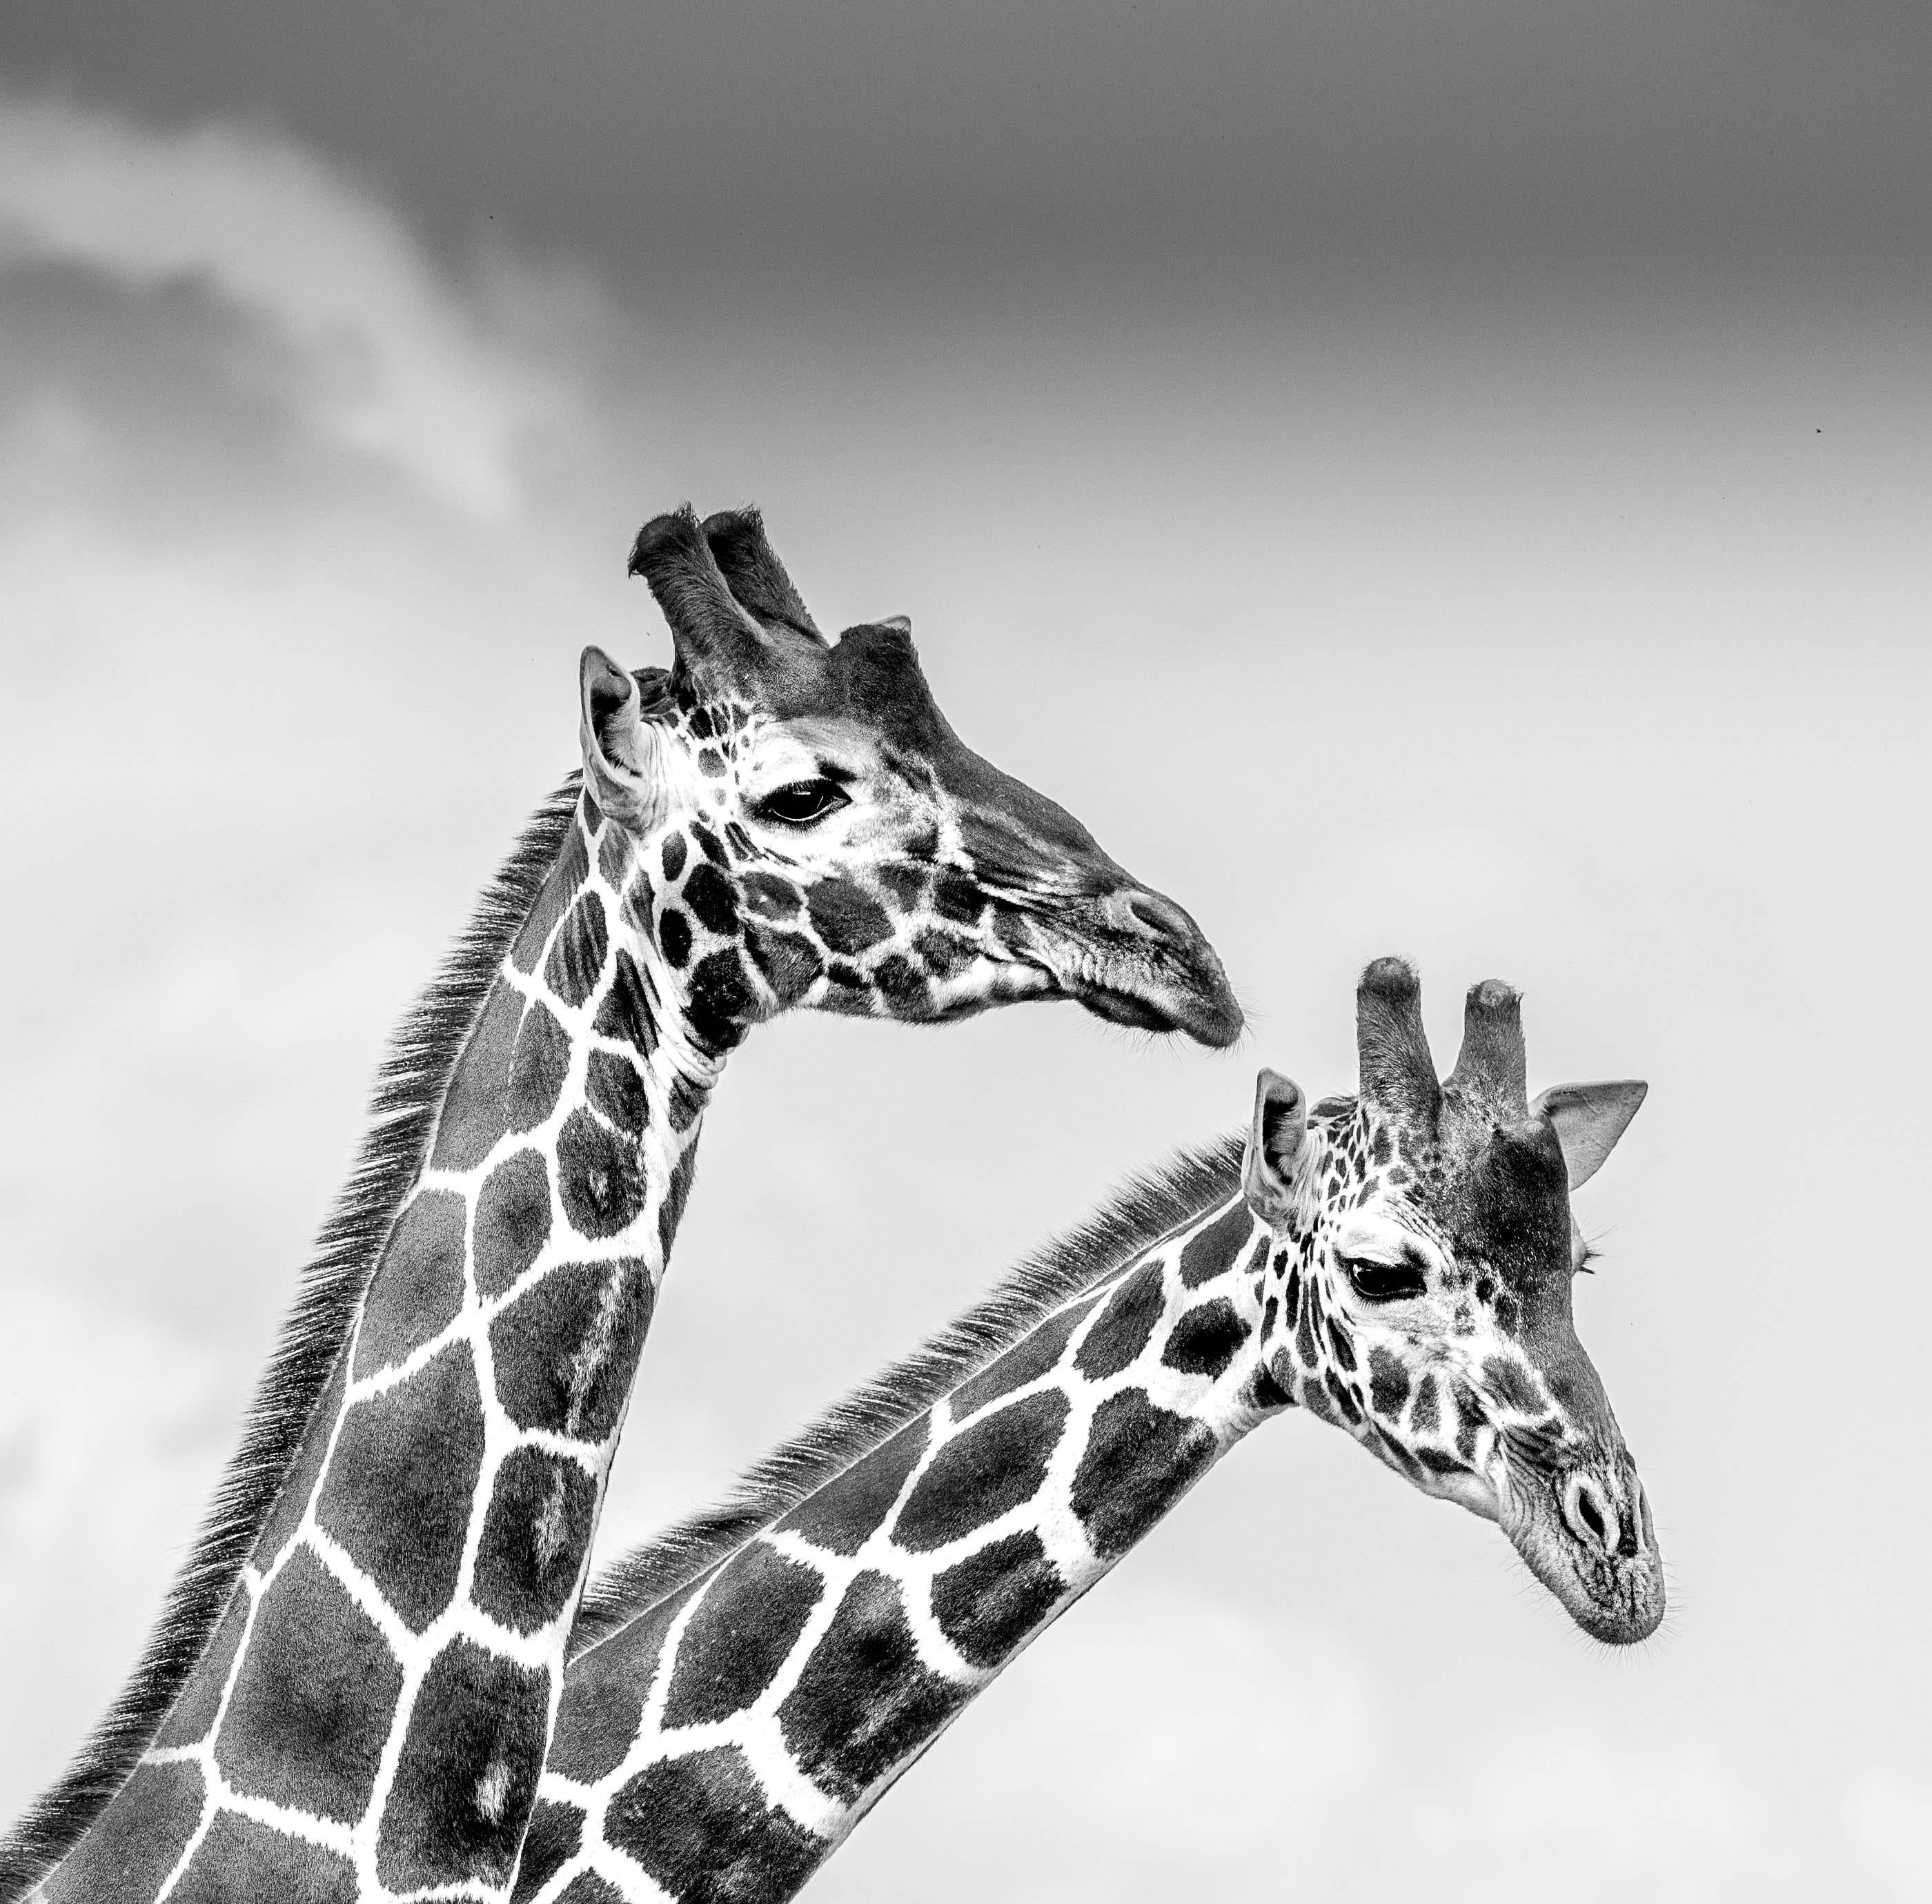 "The Giraffe has to be one of the most graceful and peculiar animals to walk the earth, and I have always been particularly drawn to the Reticulated sub-species due to their more defined patterns. Standing at up to 18ft tall, they almost always